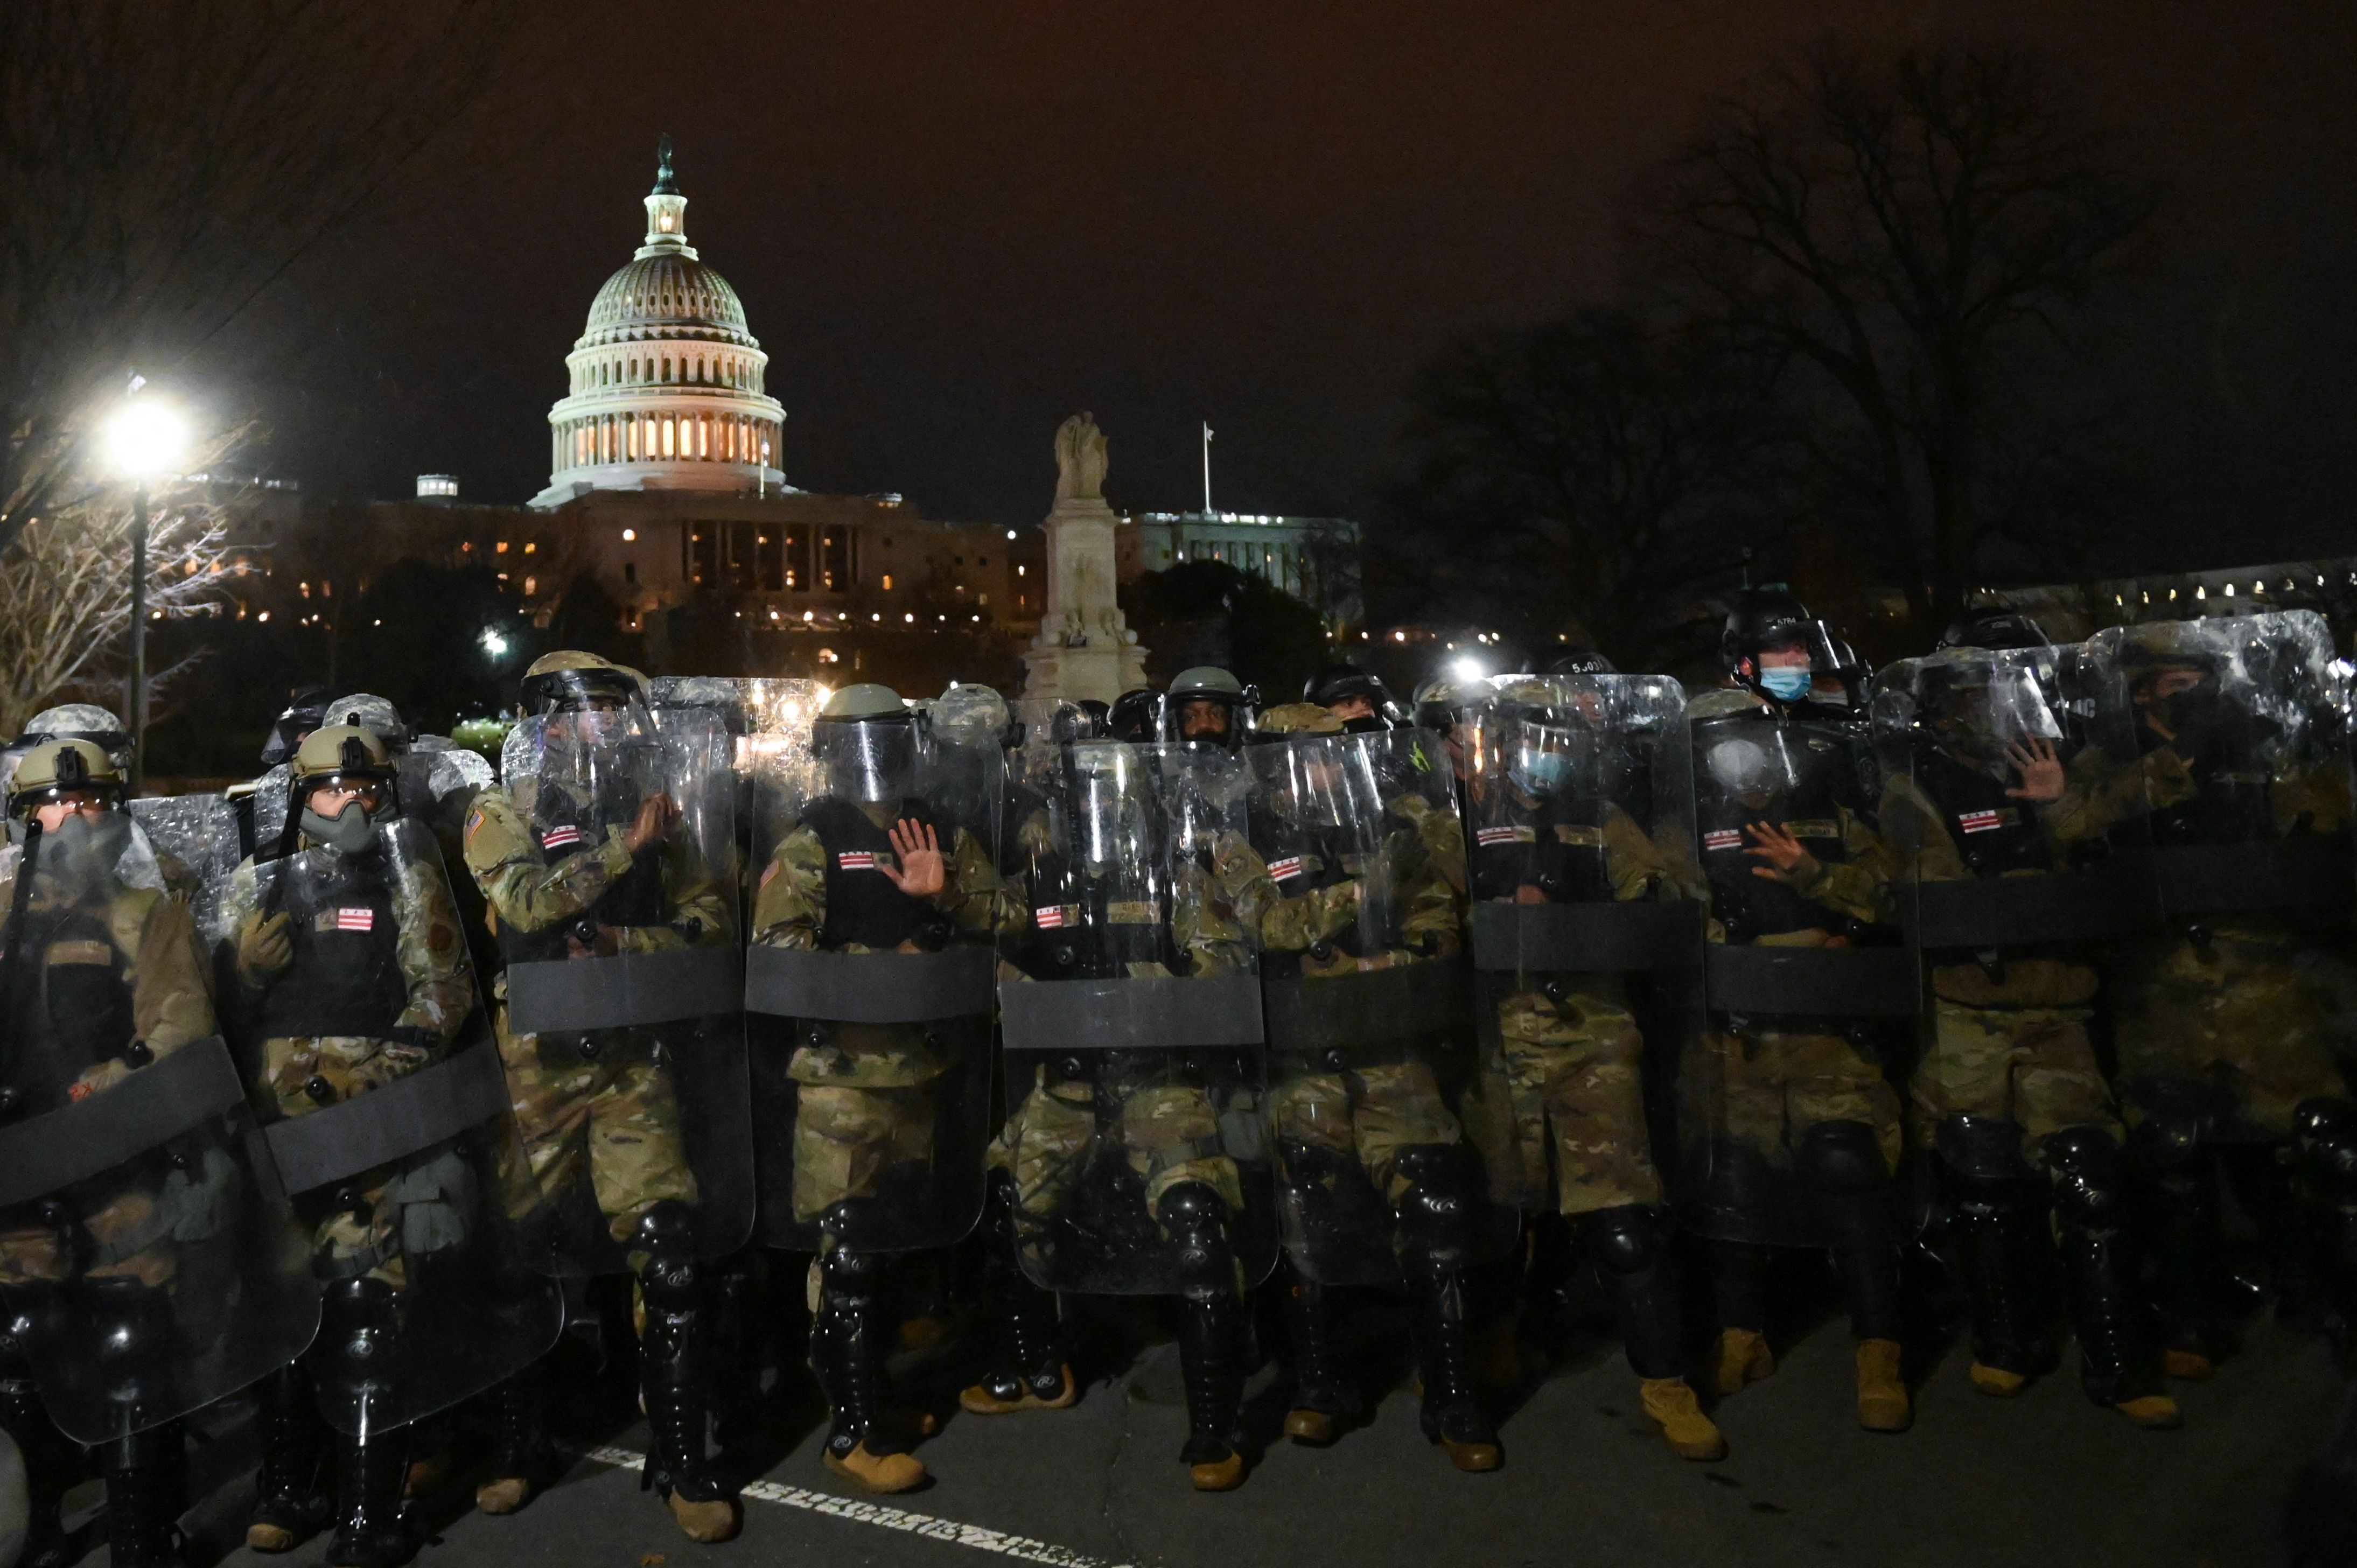 National Guard troops clear a street from protestors outside the Capitol building on January 6, 2021 in Washington, DC